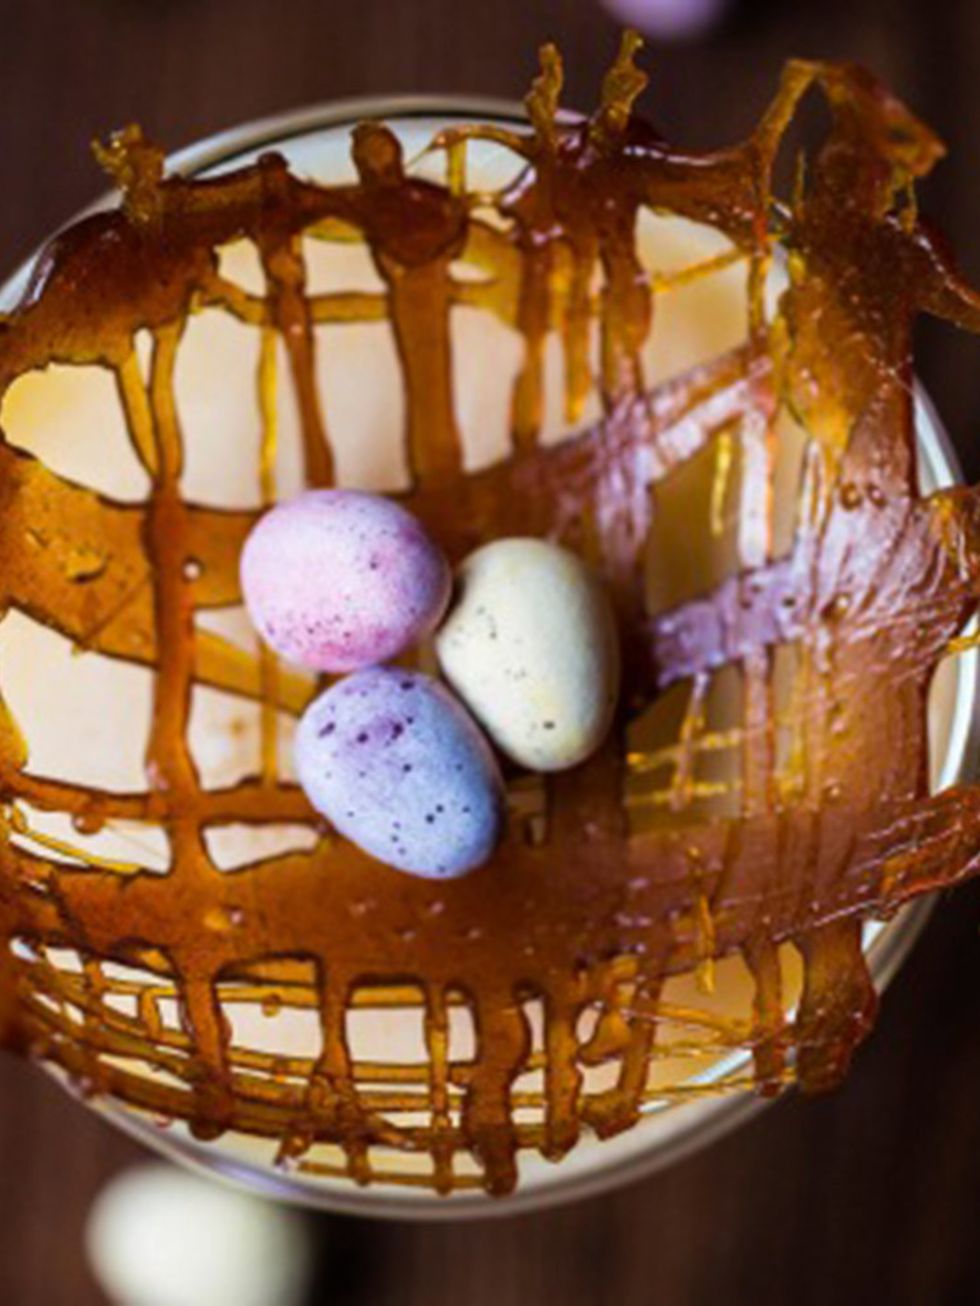 <p><strong>DRINK: Londons Regent Street Easter Cocktail Hunt</strong></p>

<p>Forget chocolate eggs.  Okay, I didnt say that. But what better way to celebrate the Easter holidays than with a hunt which involves both chocolate AND a few sneaky cocktails?